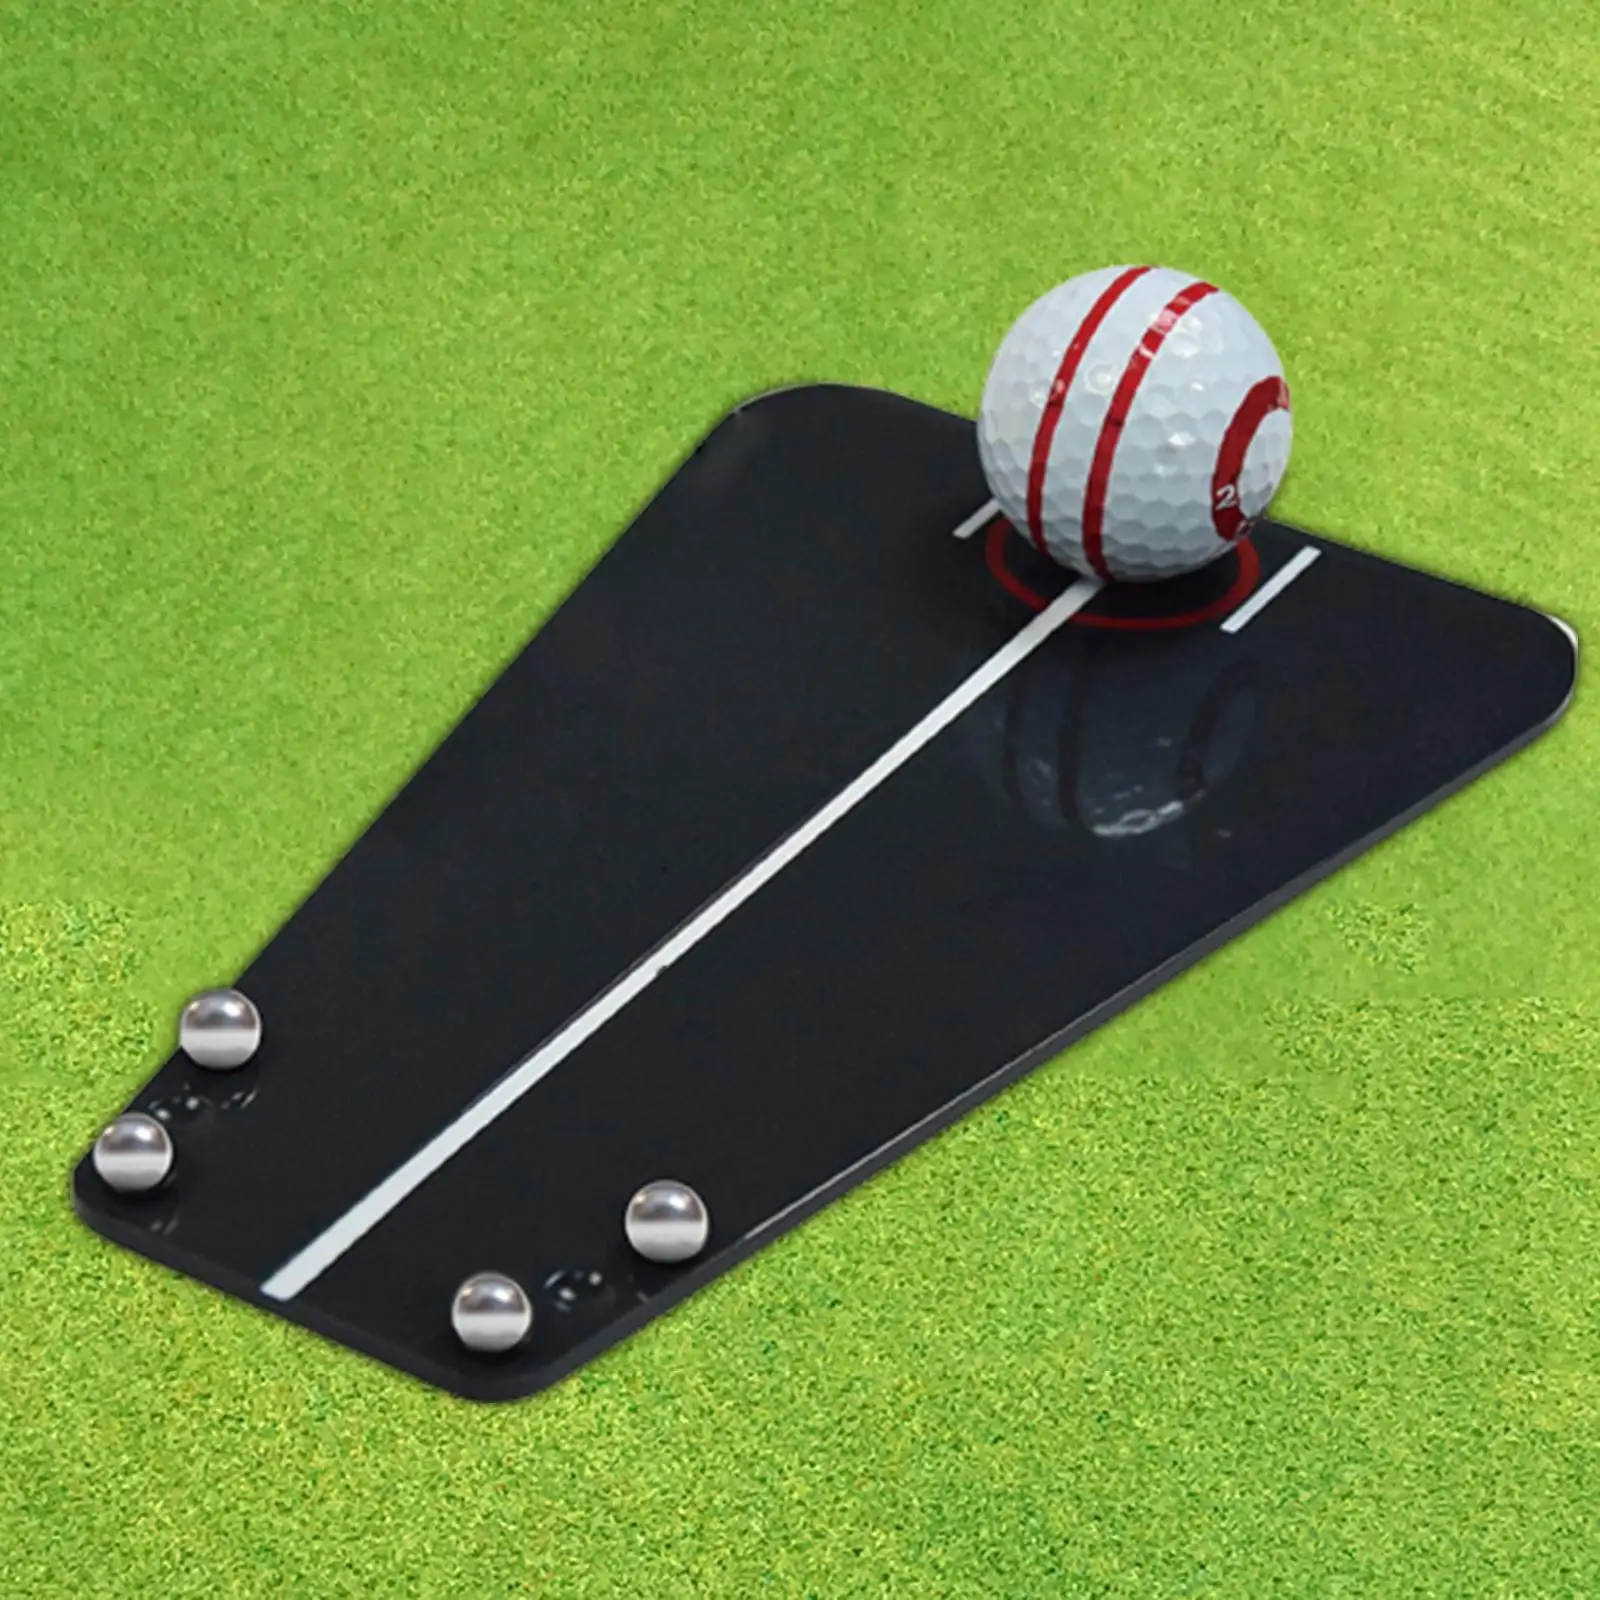 Golf Putting Tutor Swing Trainer Straight Practice Golf Putting Training Aid Improve Putting Skills for Outdoor Sports